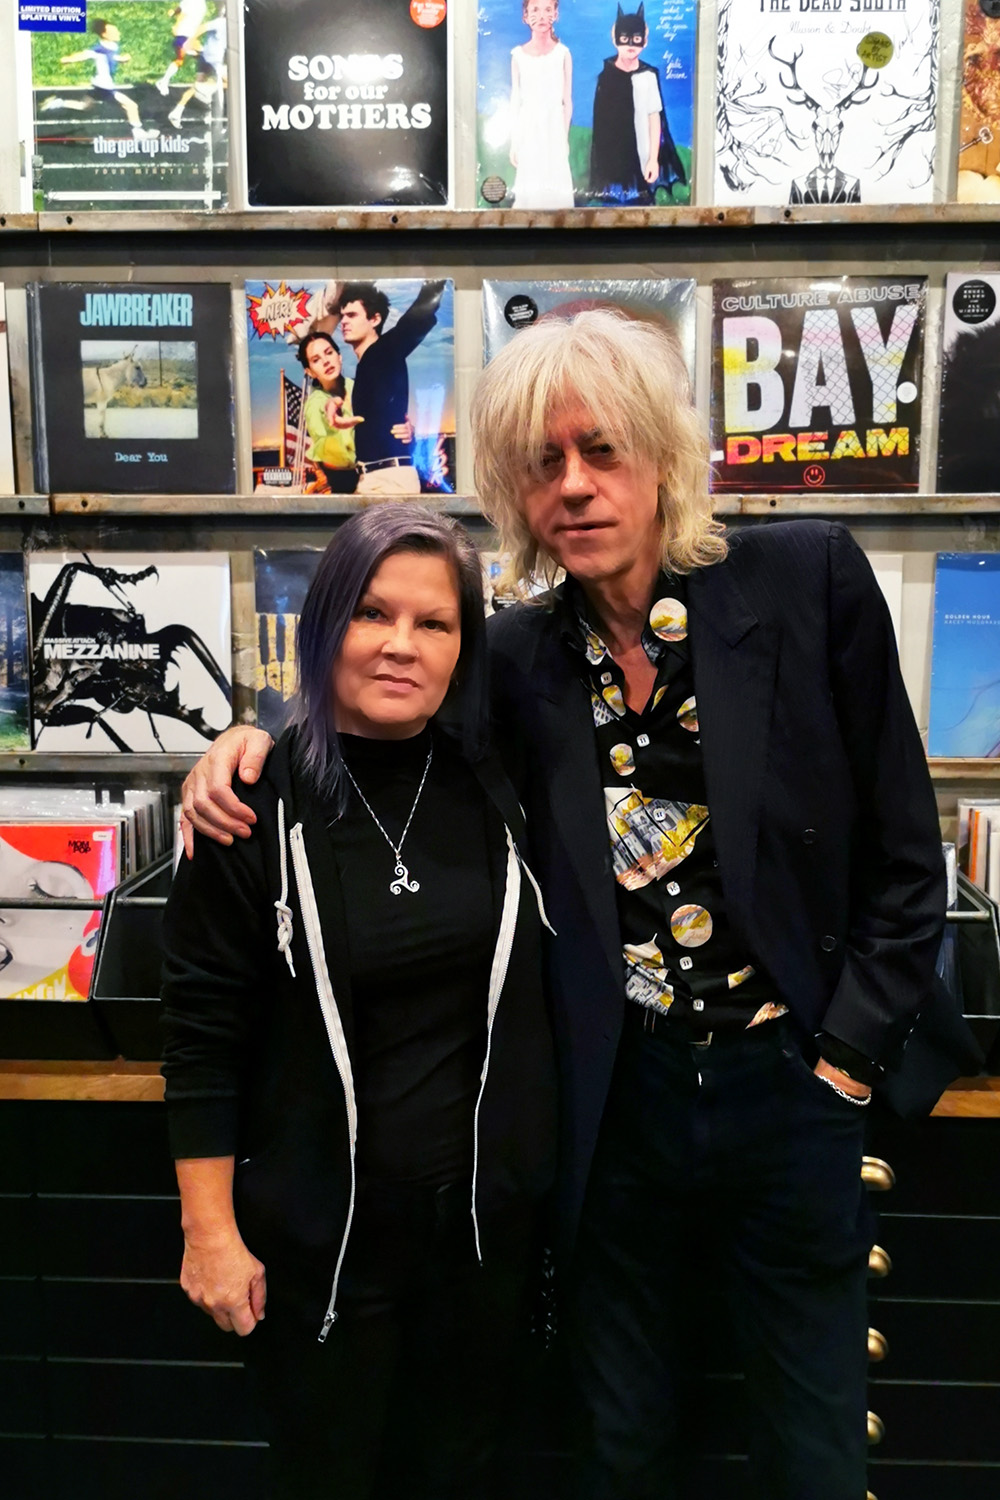 Trish Cassling with Sir Bob Geldof in Toronto at Dine Alone Records in February 2020 documentary screening